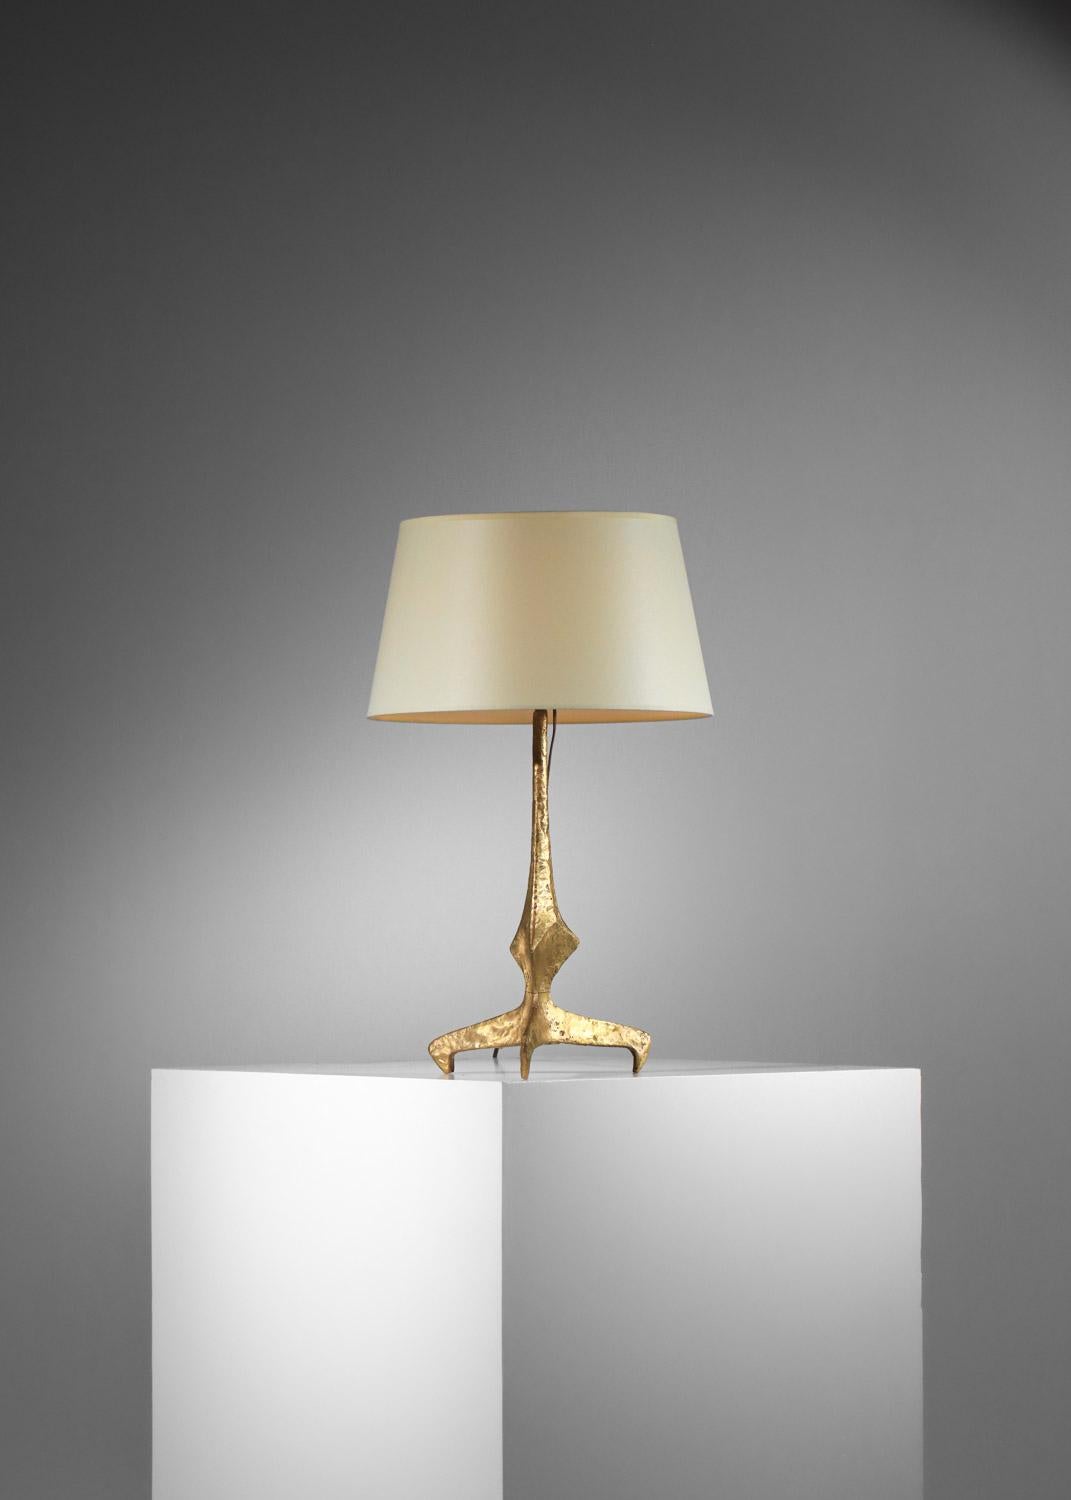 Gilt bronze table lamp in the Felix Agostini style, tripod-shaped  For Sale 2